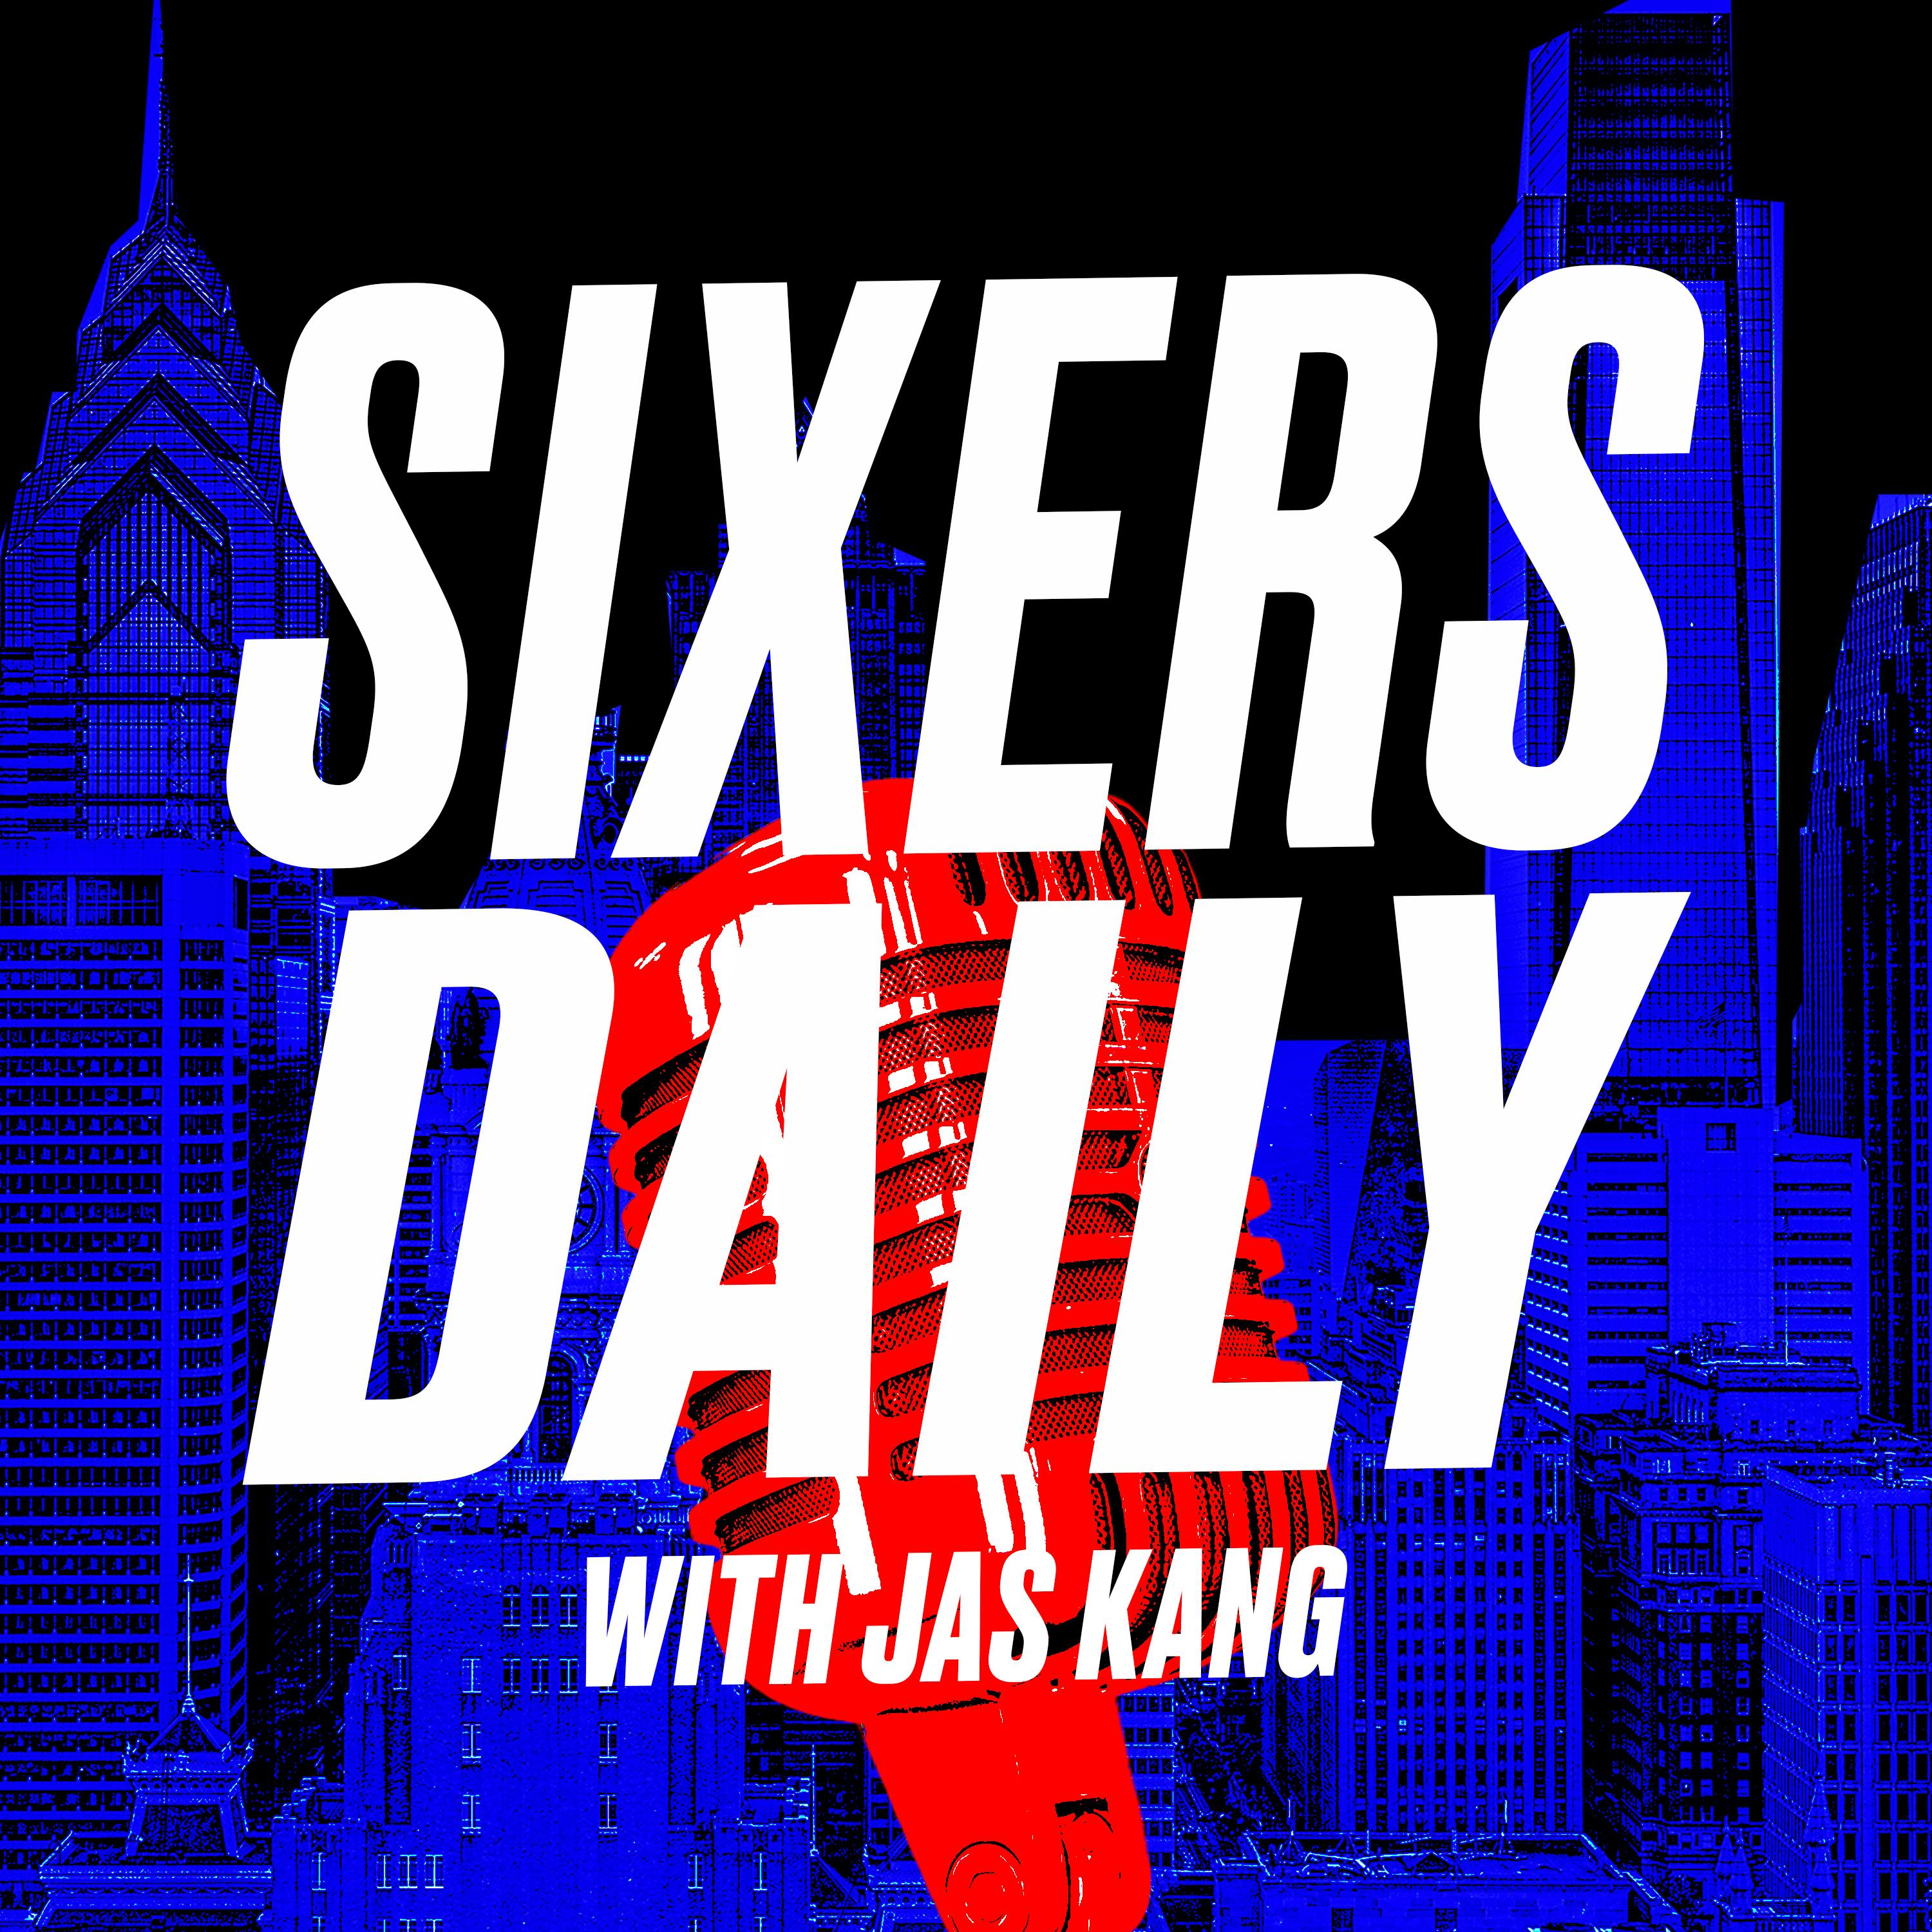 Sixers Daily with Jas Kang - 2022 free agency primer: James Harden opts out and takes less than the max. What does that mean for the Sixers in free agency and who can Daryl Morey add? With Dave Early.